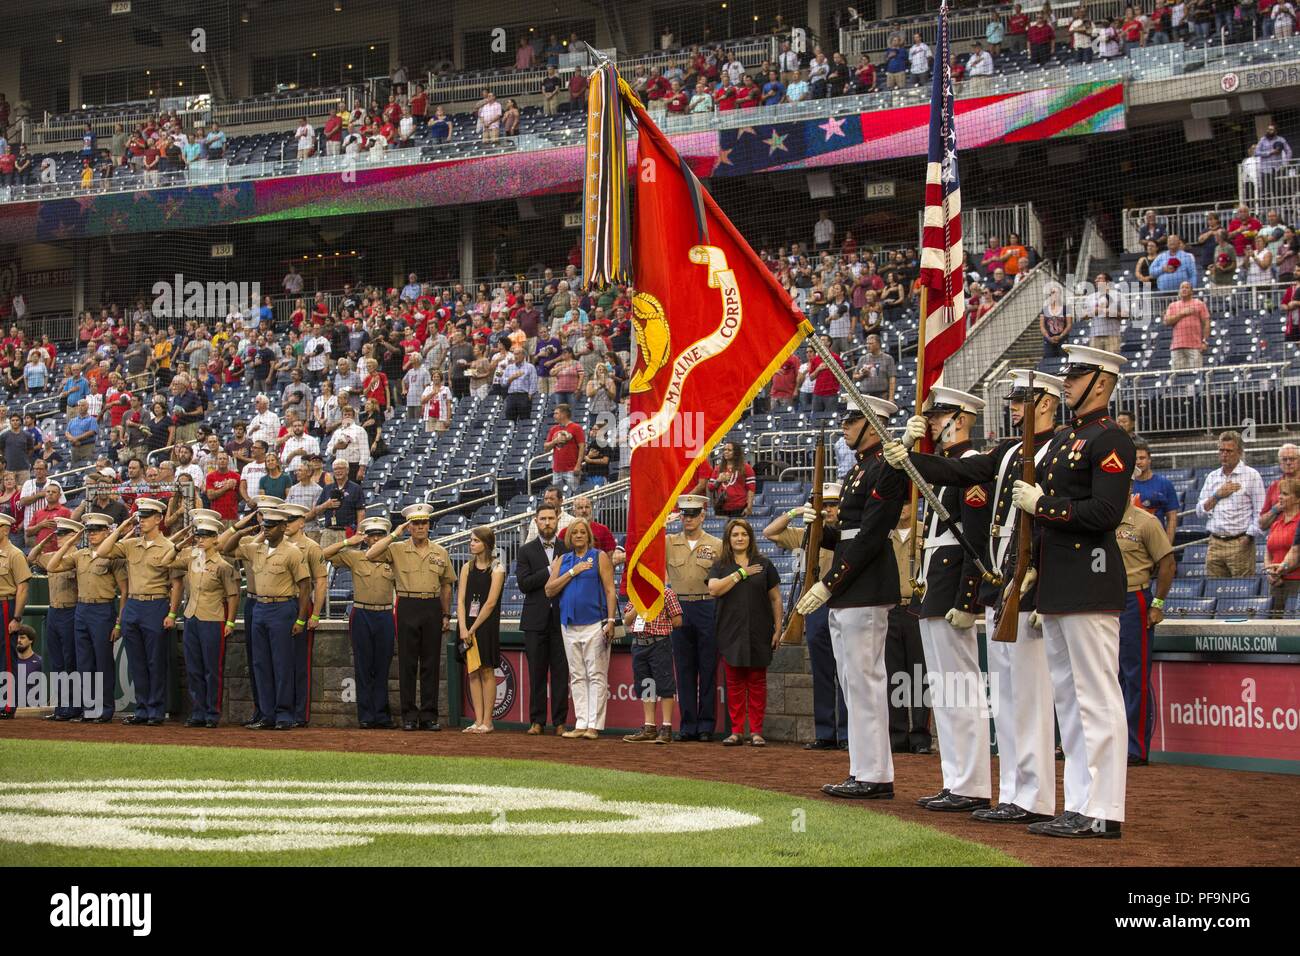 Marines with the US Marine Corps Color Guard present the National Ensign during the playing of the National Anthem at US Marine Corps Day at Nationals Park, Washington DC, July 31, 2018. Image courtesy Sgt. Robert Knapp/Marine Barracks Washington, 8th. () Stock Photo